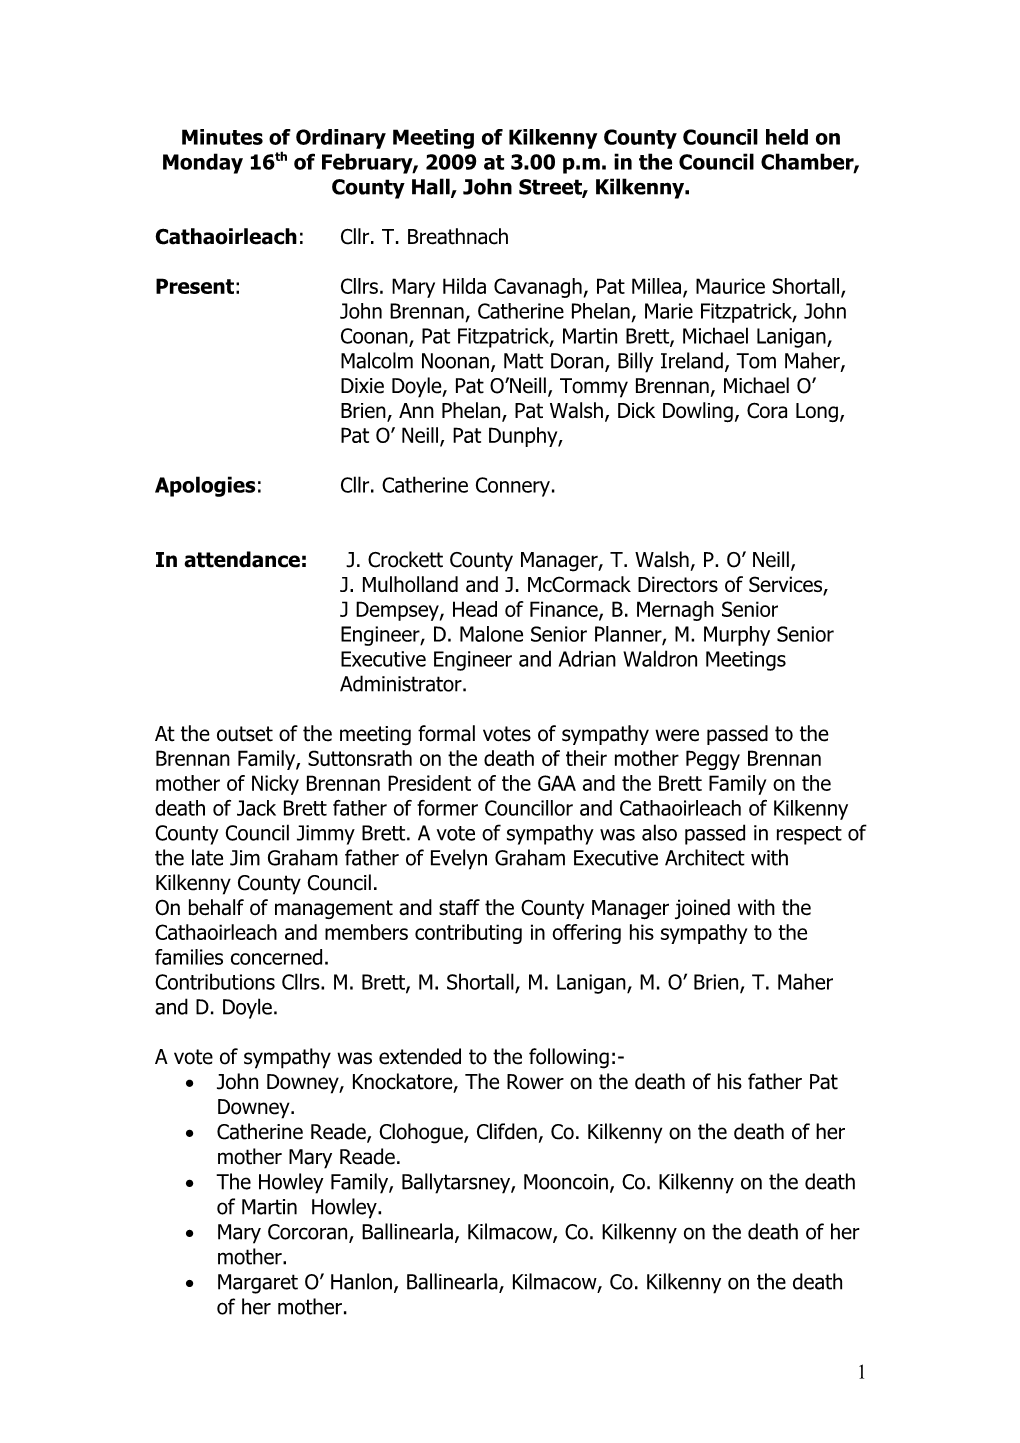 Minutes of Ordinary Meeting of Kilkenny County Council Held on Monday 19Th of January, 2009 at 3